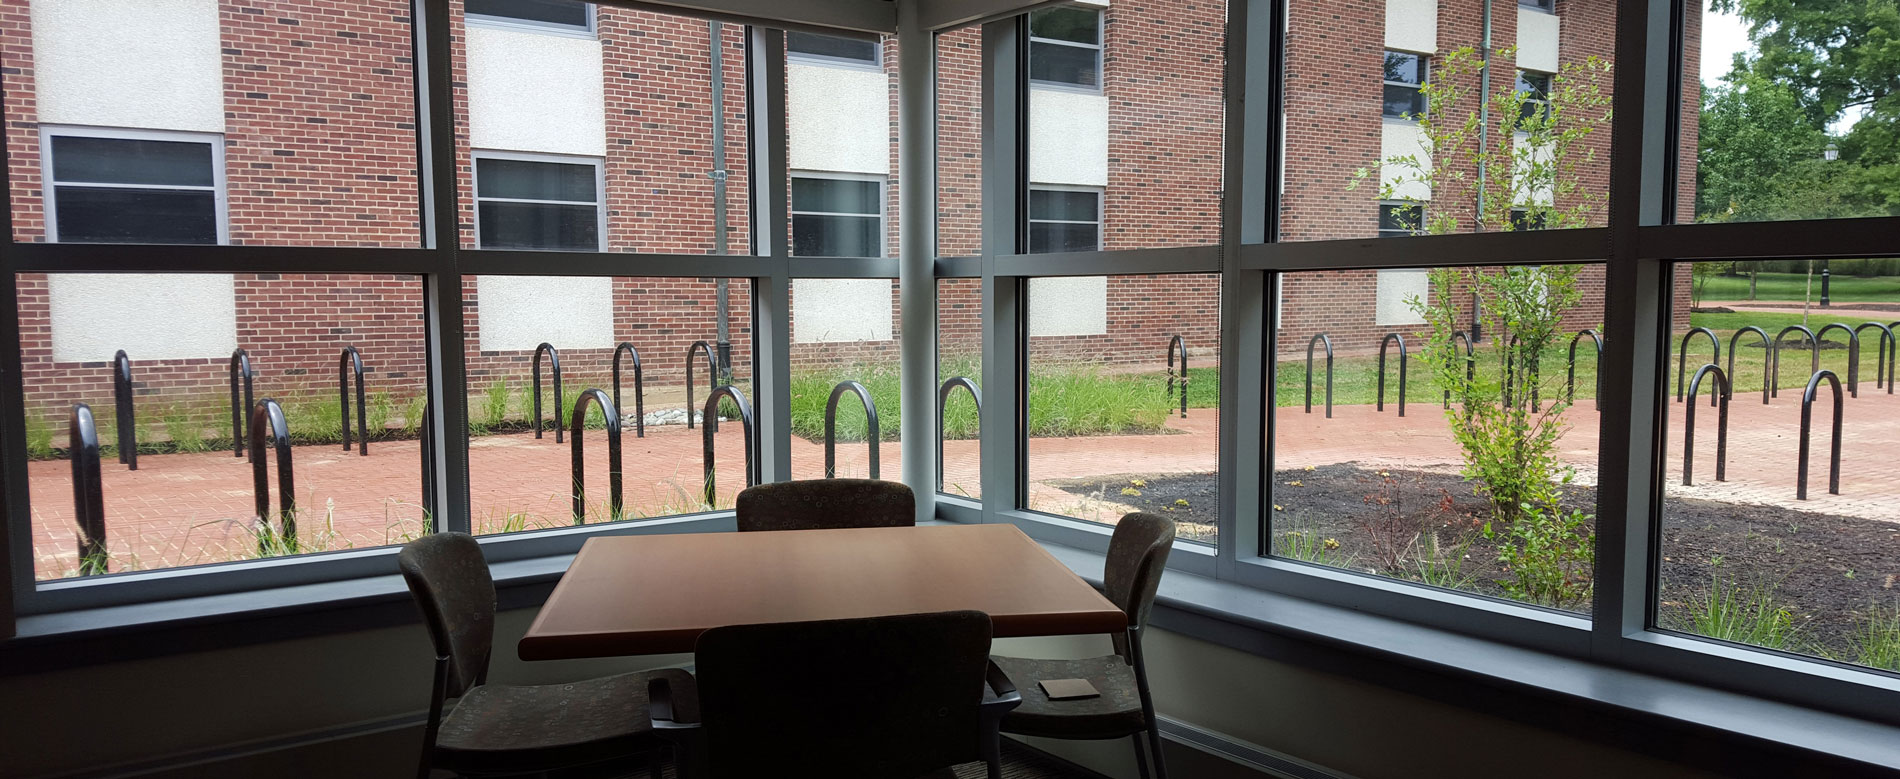 photo looking out windows of the Harrington Commons